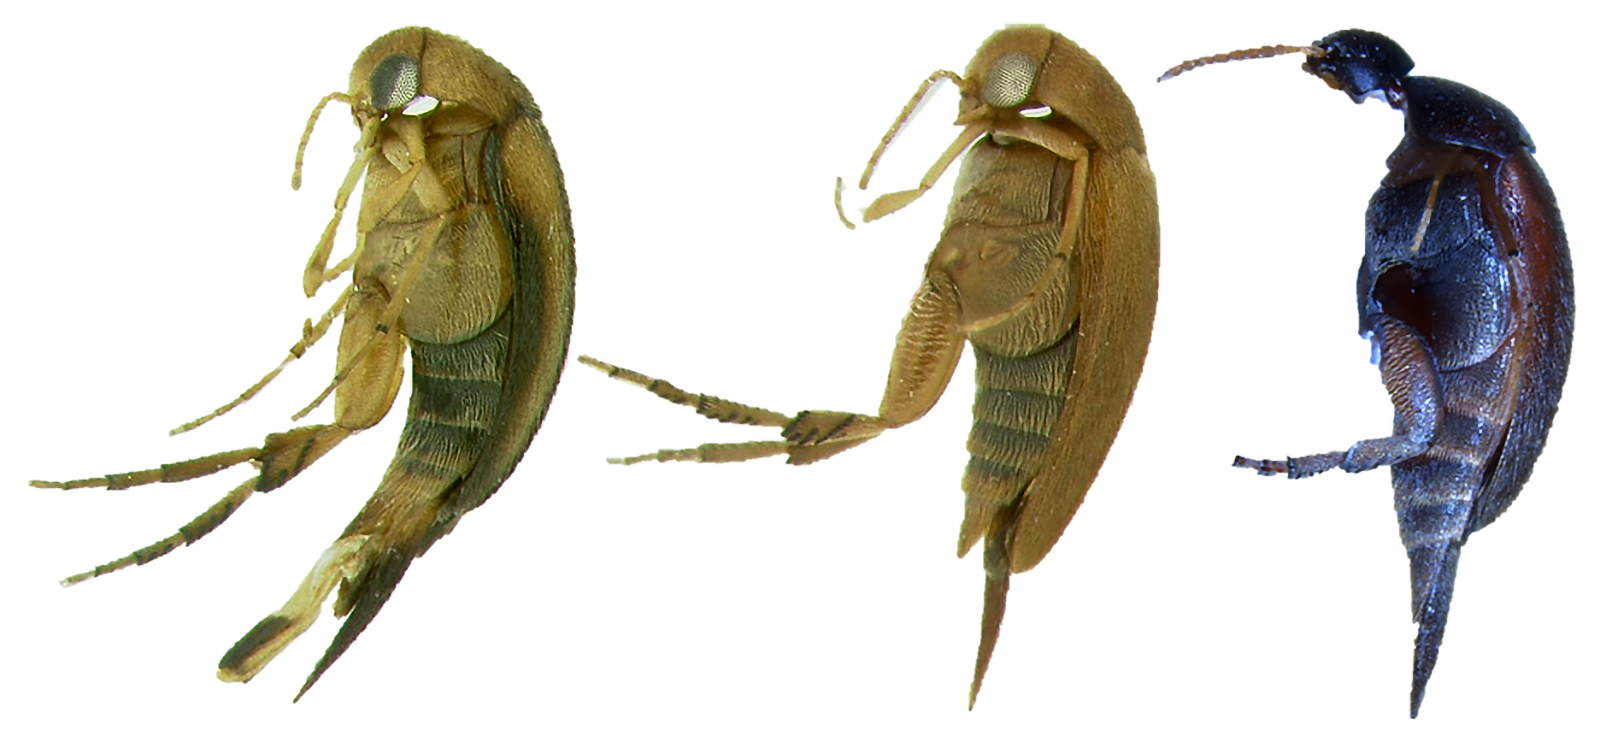 Three beetles shown on their sides, lined up in a row. The two left images are light beige in color; the right image is deep purple.